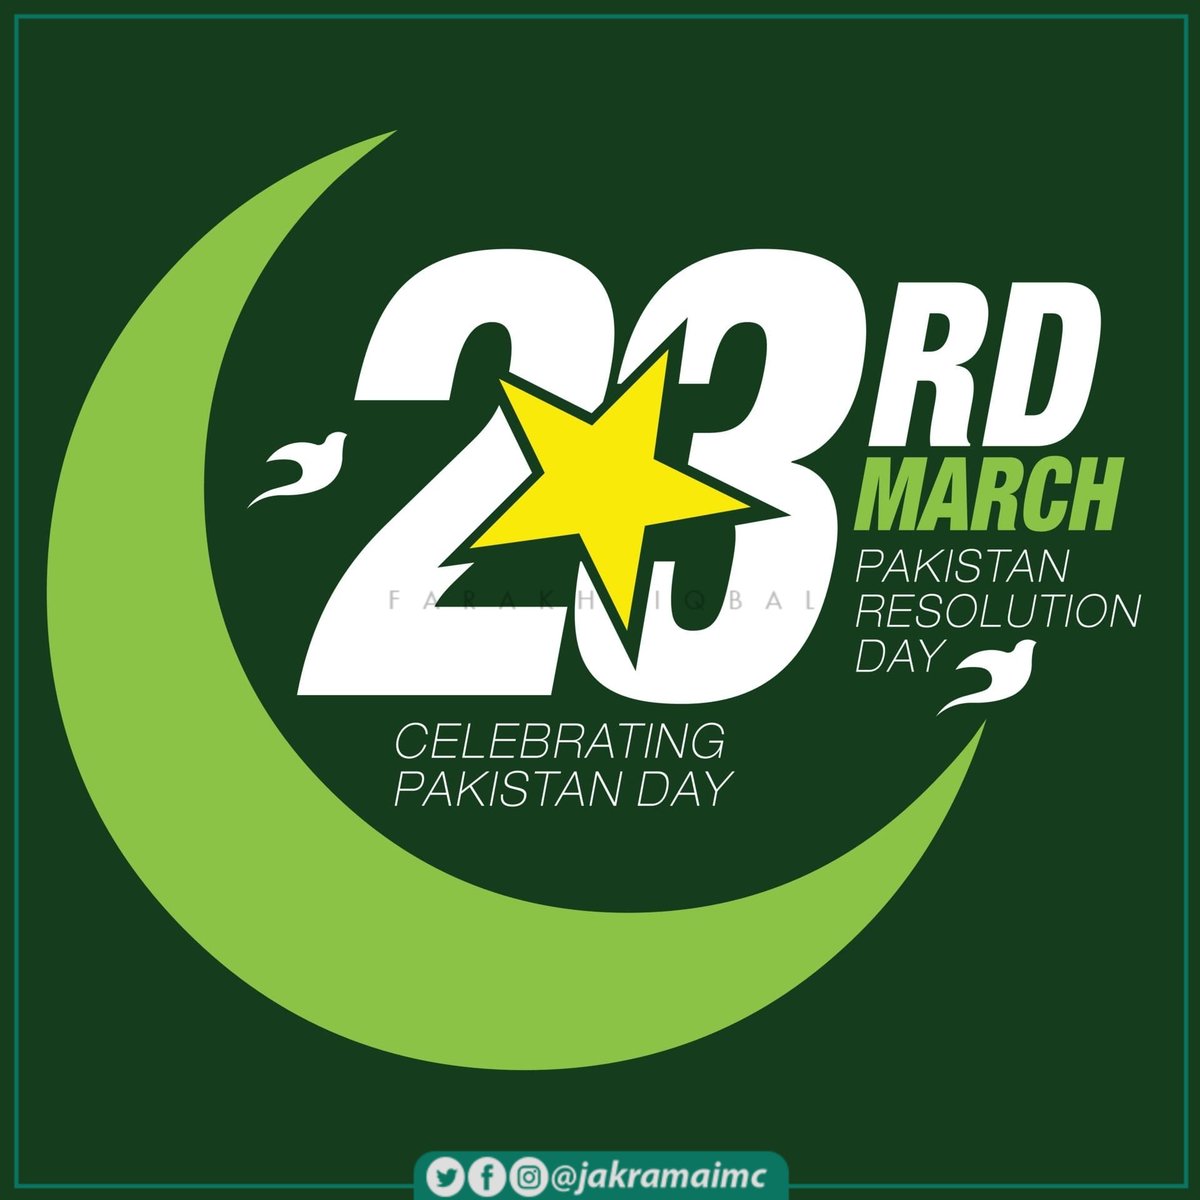 Today, we commemorate the historic moment when a nation united in its resolve for freedom. Happy Pakistan Resolution Day! #23march #ResolutionDay #PakistanDay #PakistanZindabad